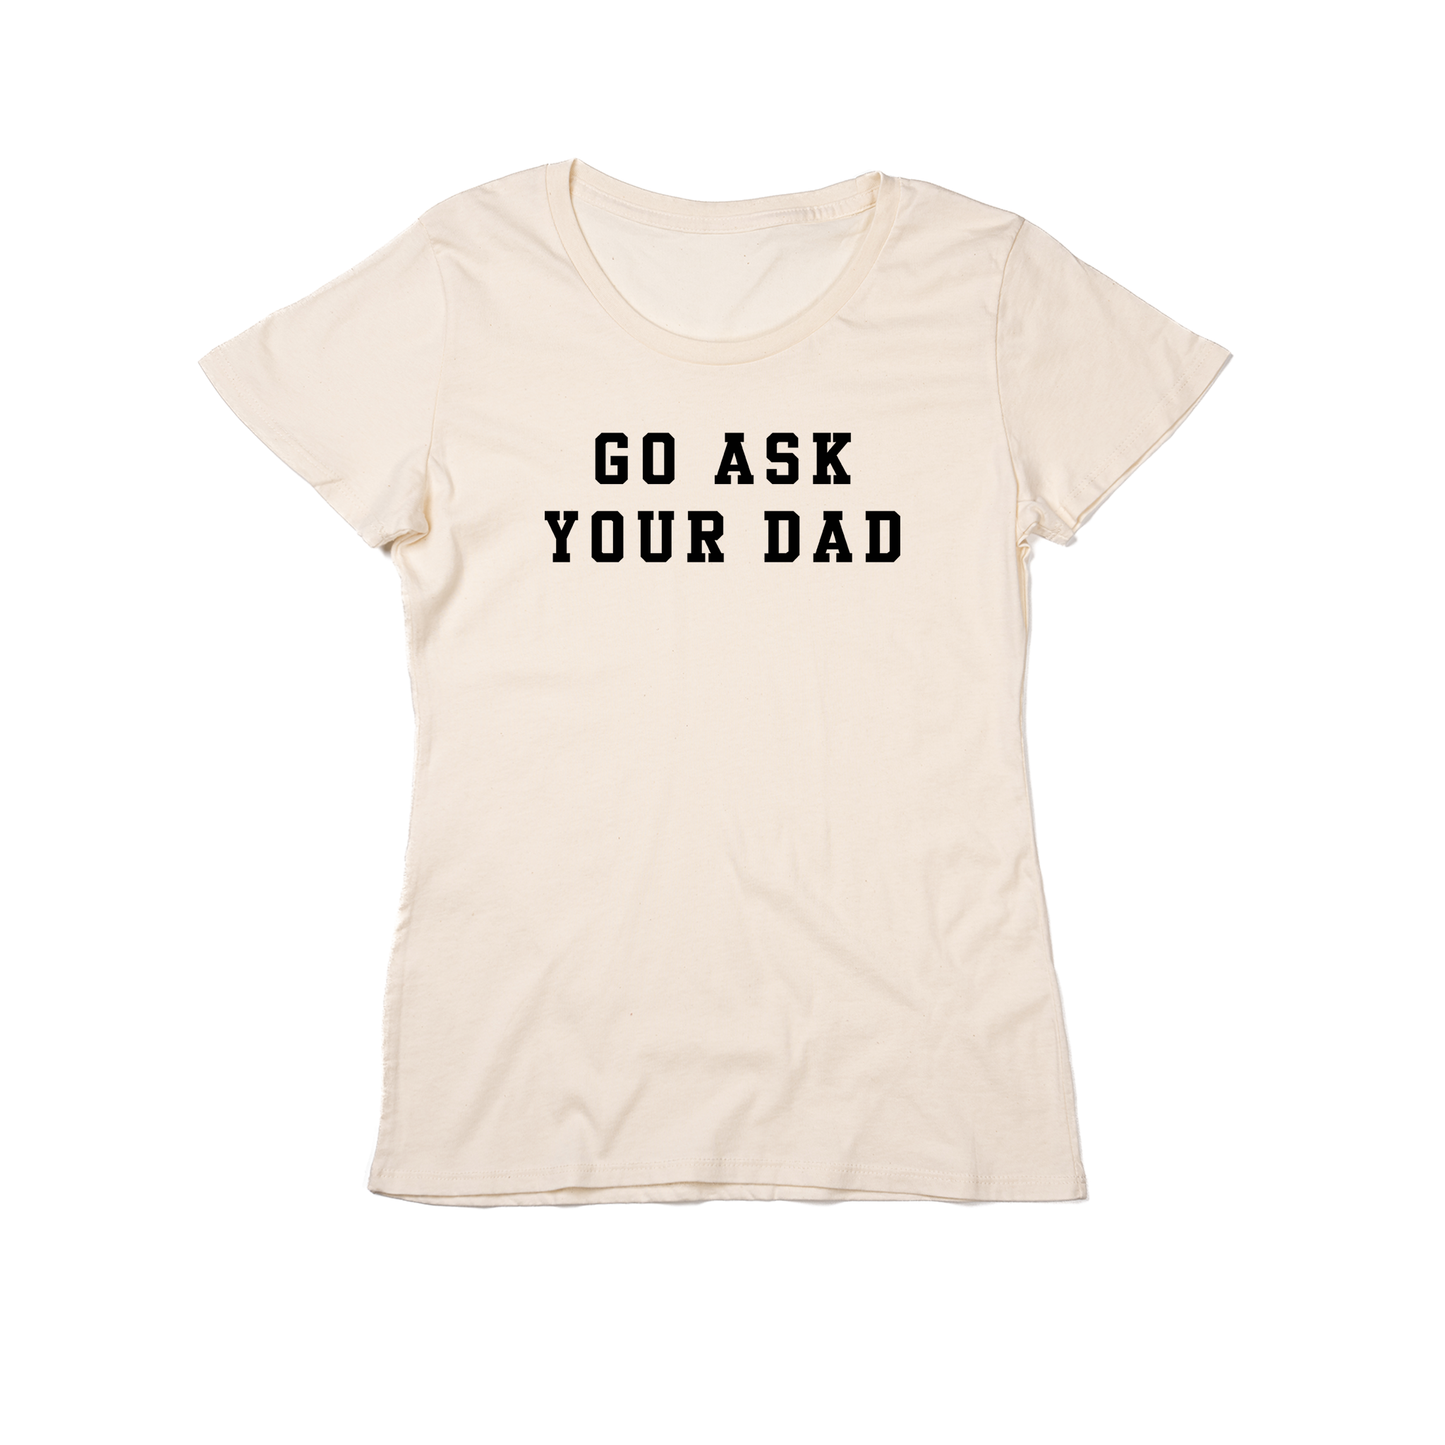 Go Ask Your Dad (Black) - Women's Fitted Tee (Natural)